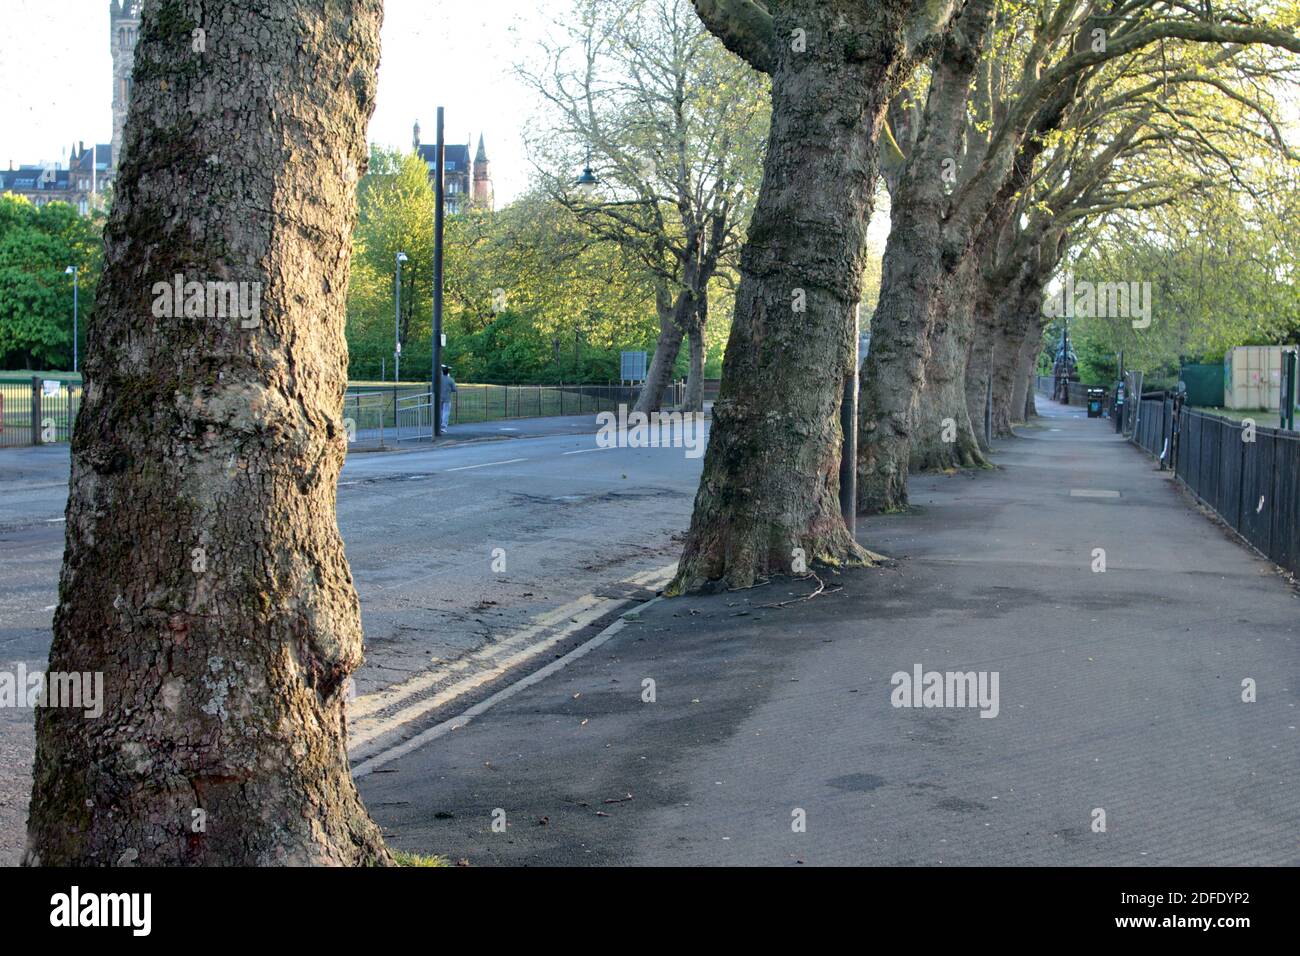 Big trees line Kelvinway which cuts through Kelvingrove park in Glasgow. The trees grow up through the pavement, and it is a pleasant stroll in the summer. There is a reduced speed limit and Kelvinway is normally thronging with people seeking out the pleasures of Kelvingrove park. The walk way crosses over the River Kelvin! ALAN WYLIE/ALAMY © Stock Photo